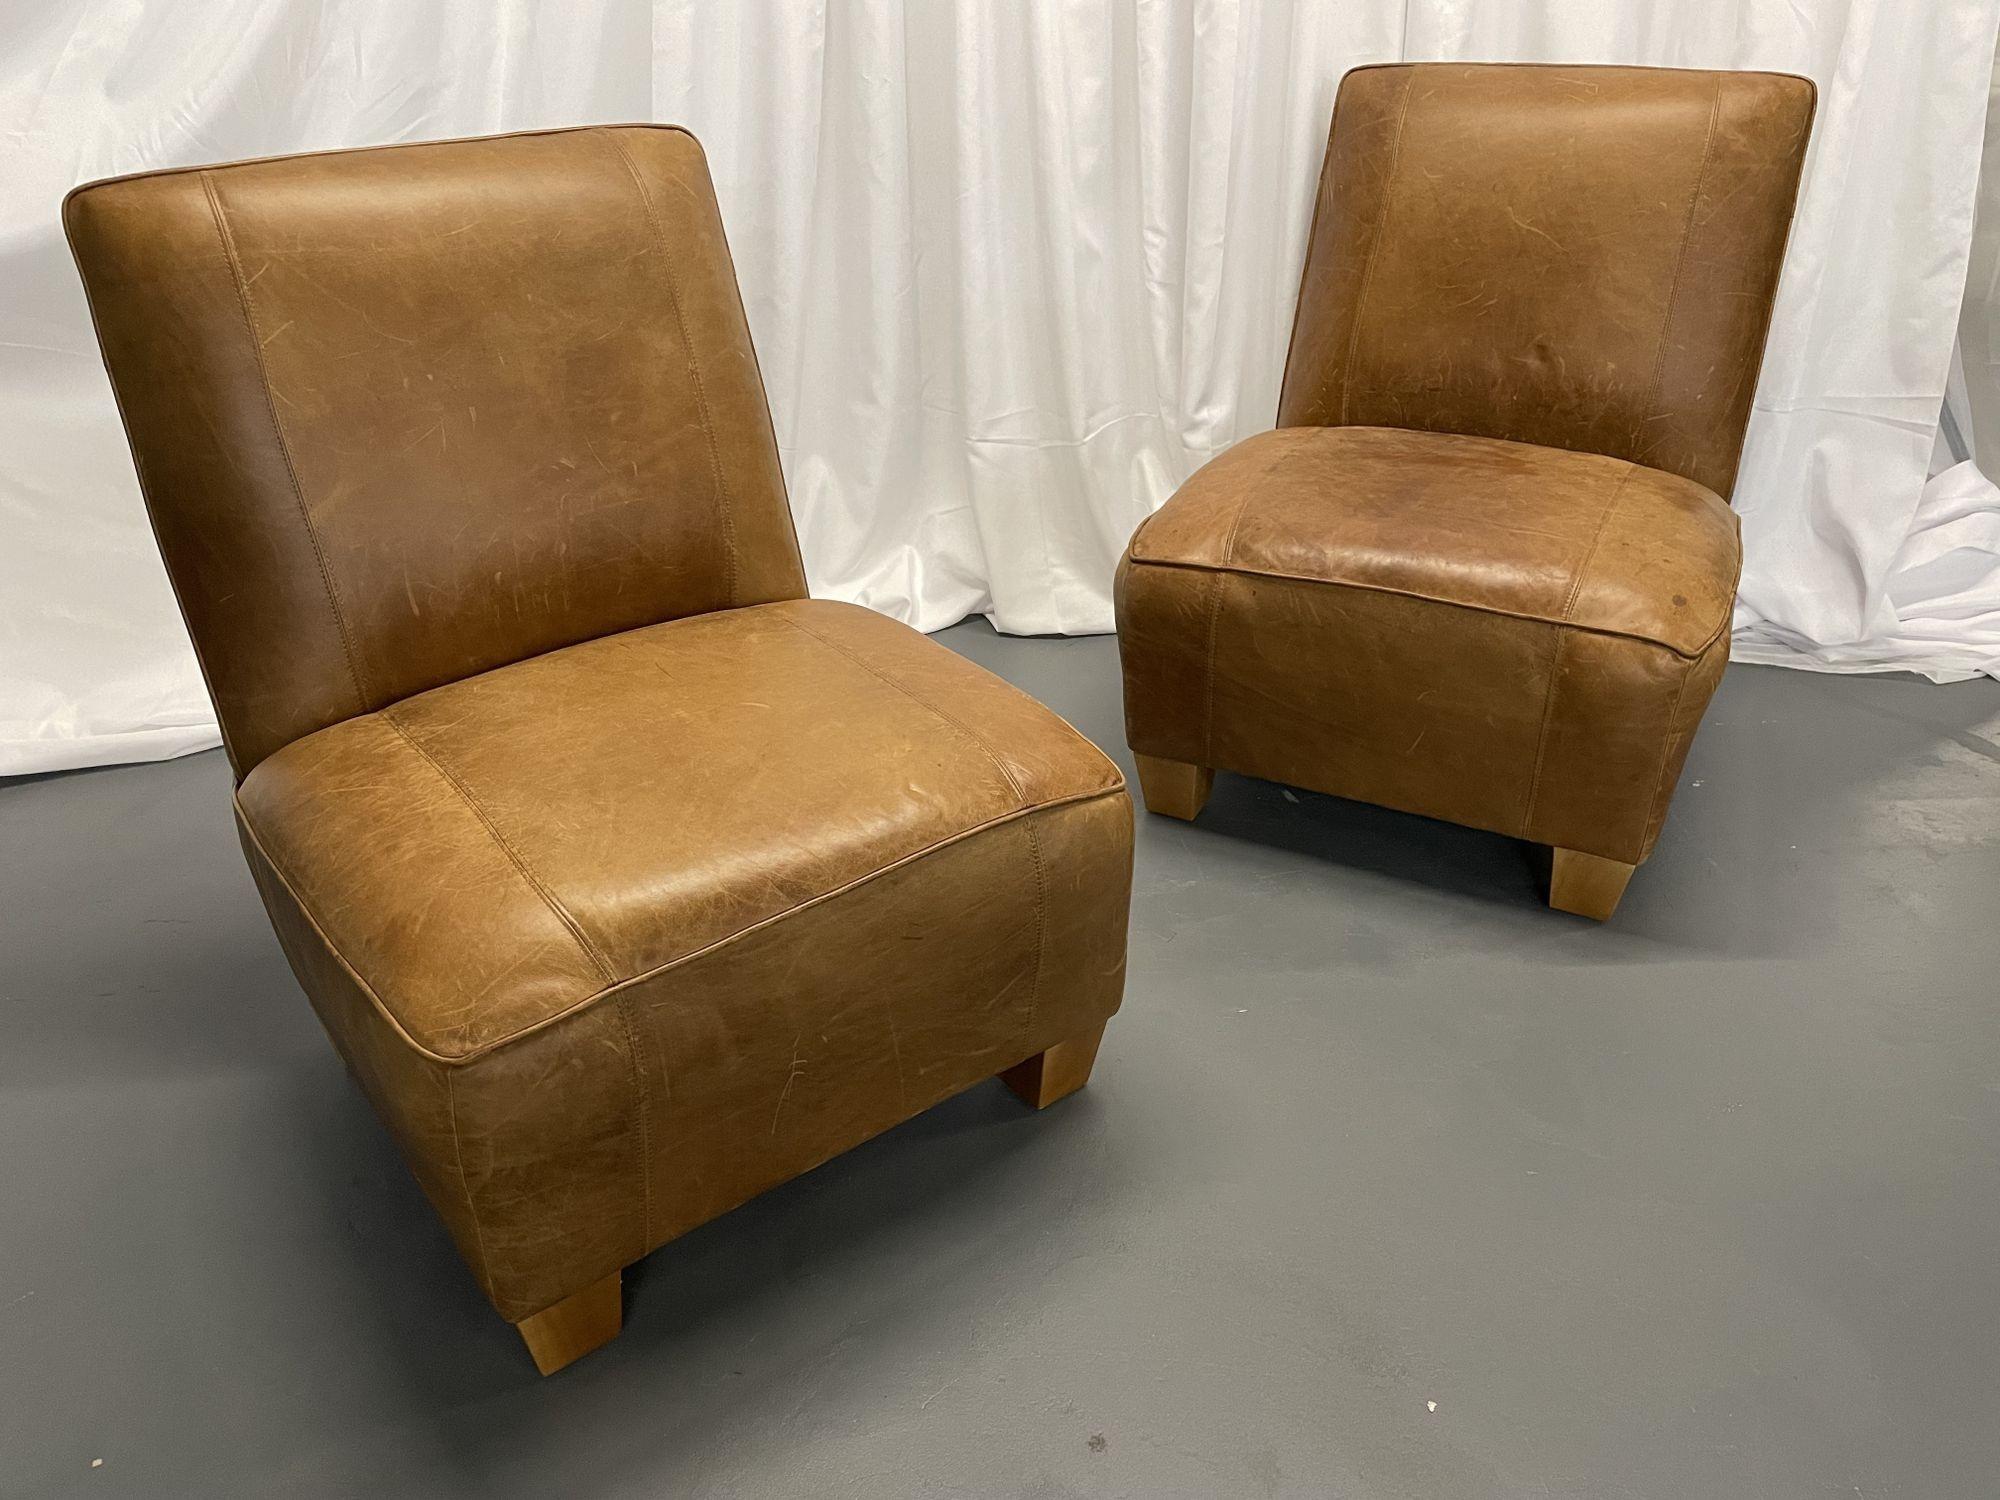 Pair oversized Modern American Designer Art Deco leather lounge / slipper chairs
 
A pair of modern art deco style large leather chairs on low profile bracket feet.
 
Other American designers of the period include Adrian Pearsall, Milo Baughman,